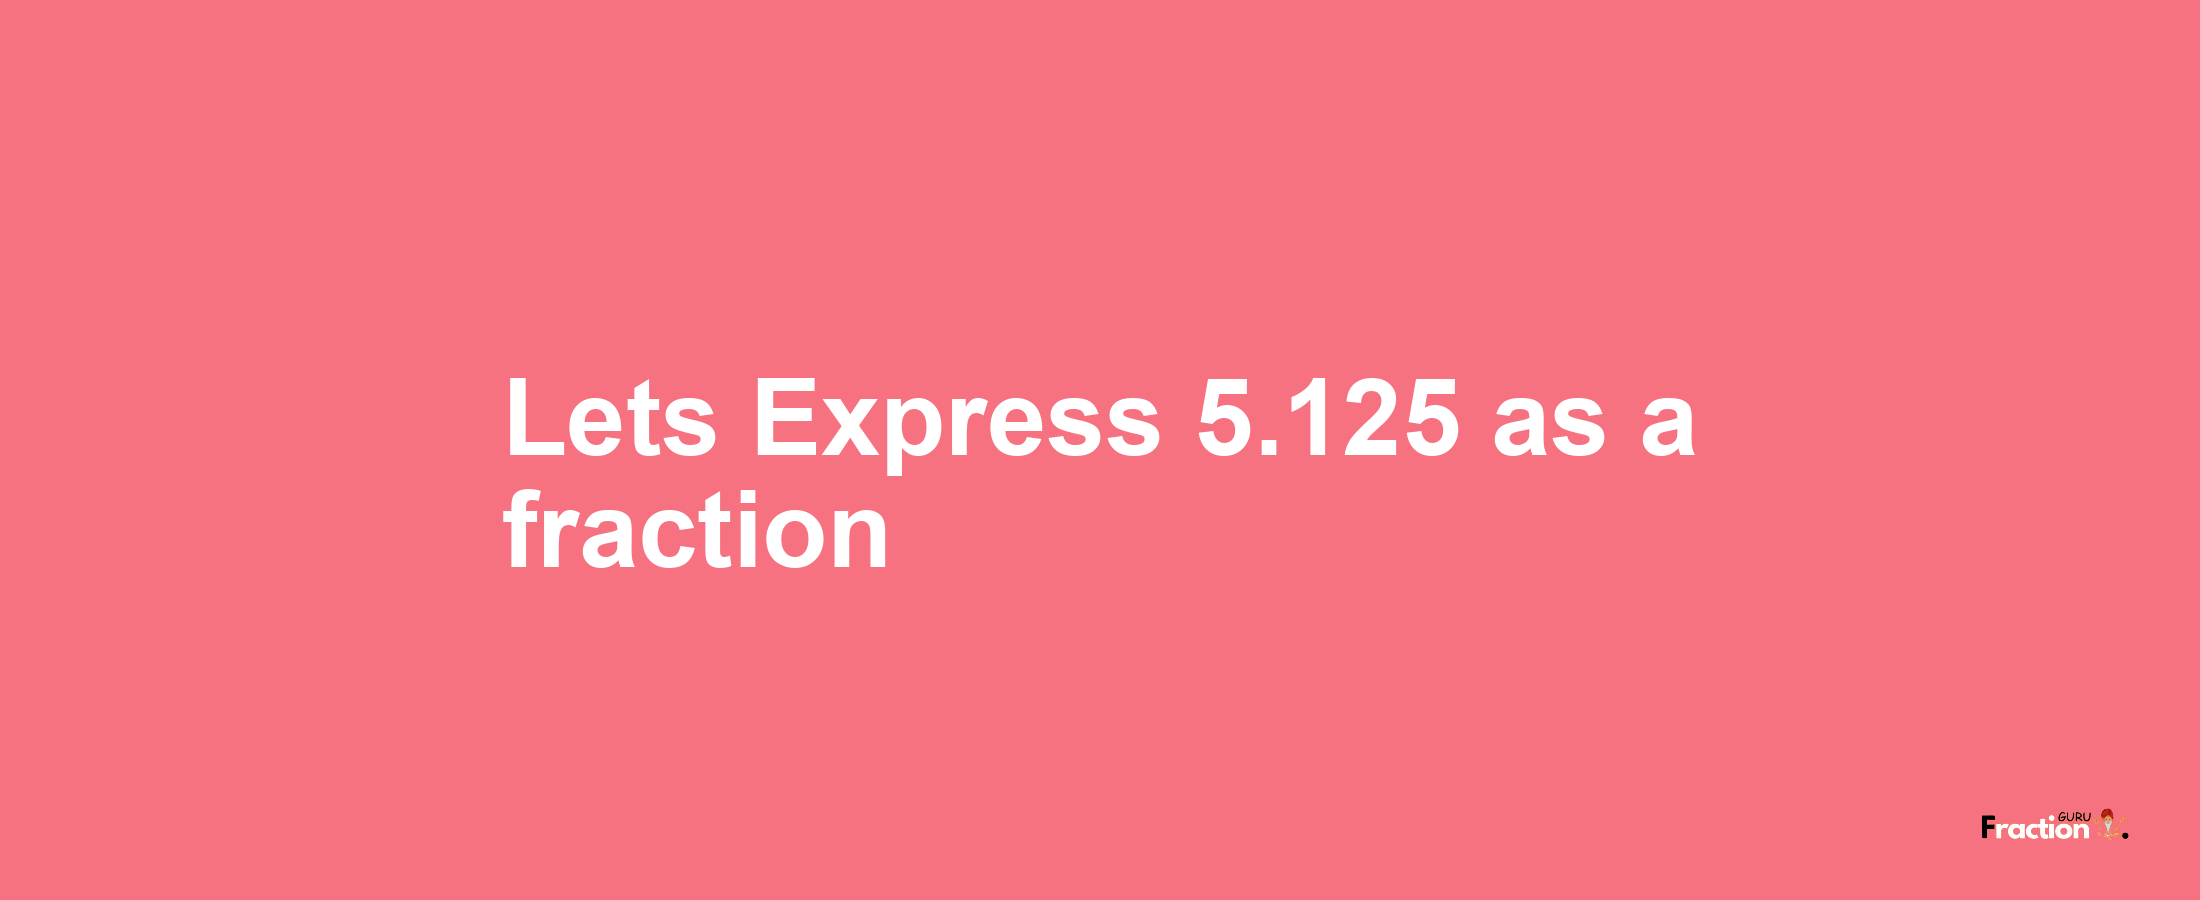 Lets Express 5.125 as afraction